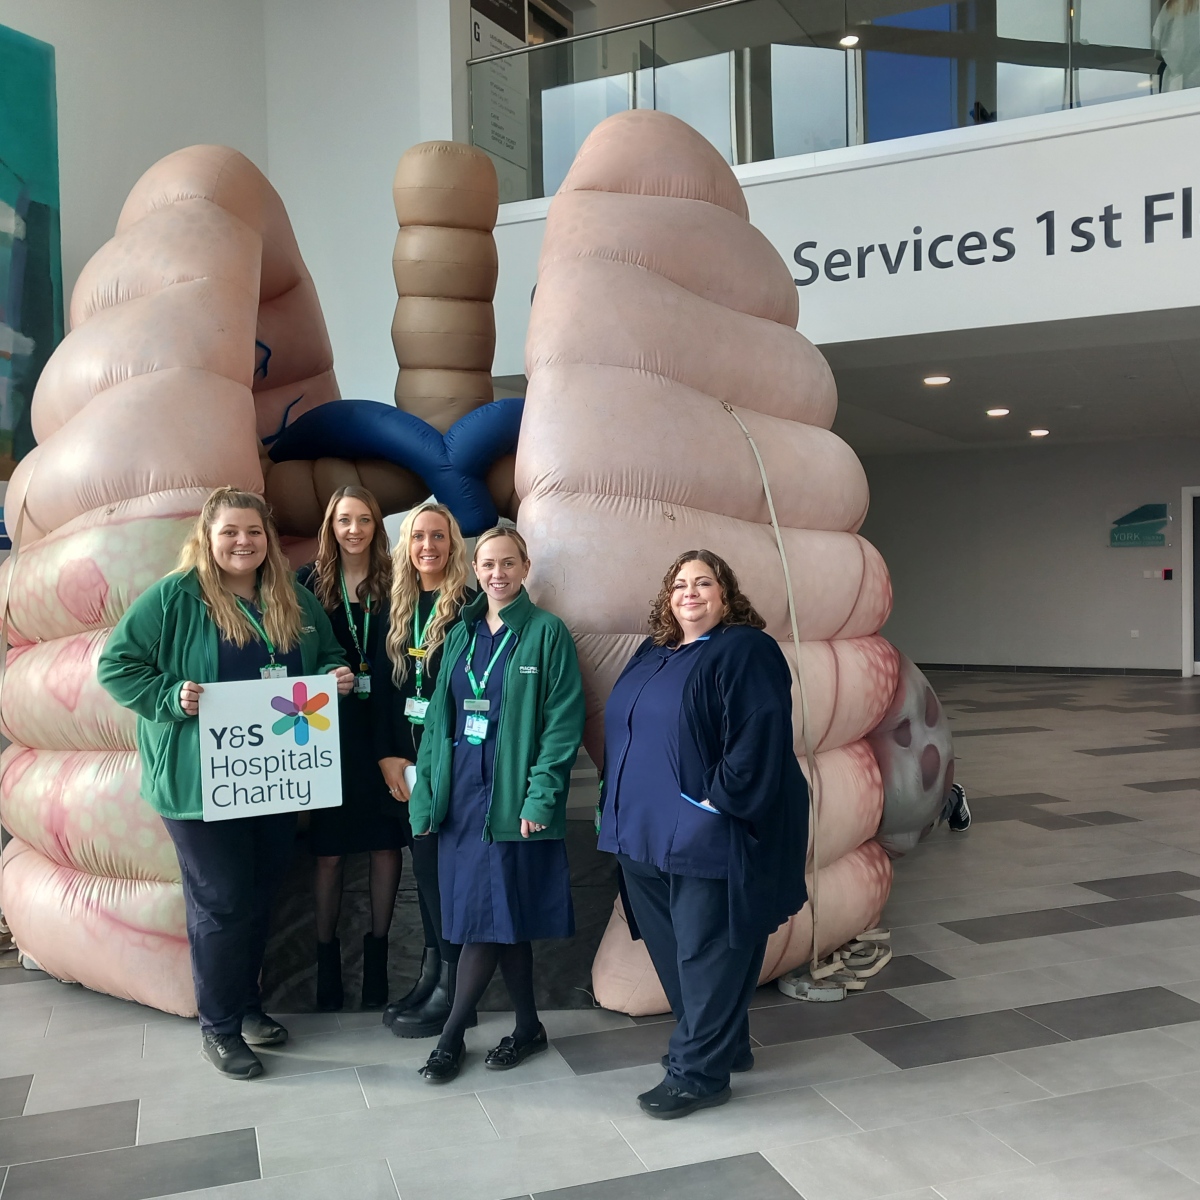 12ft Mega Lungs at lung cancer awareness event